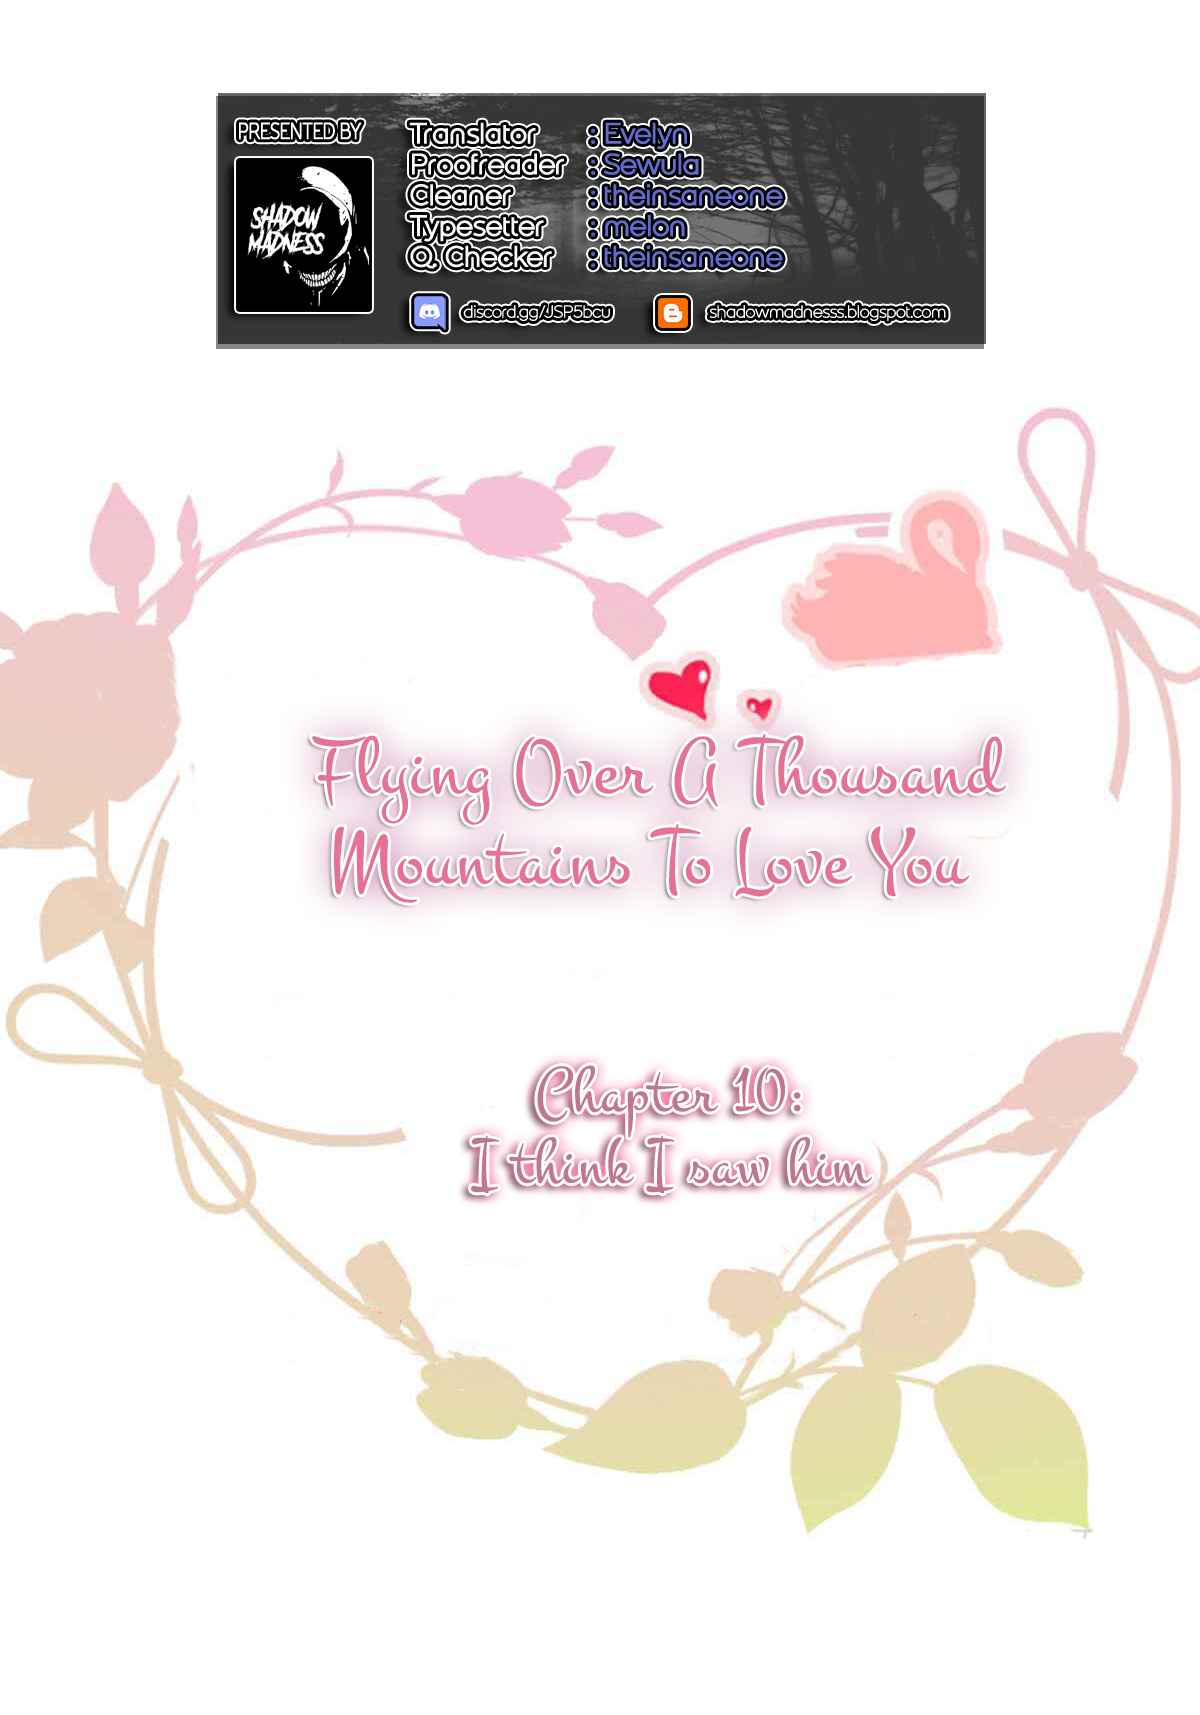 Flying Over a Thousand Mountains to Love You Ch. 10 I think I saw him